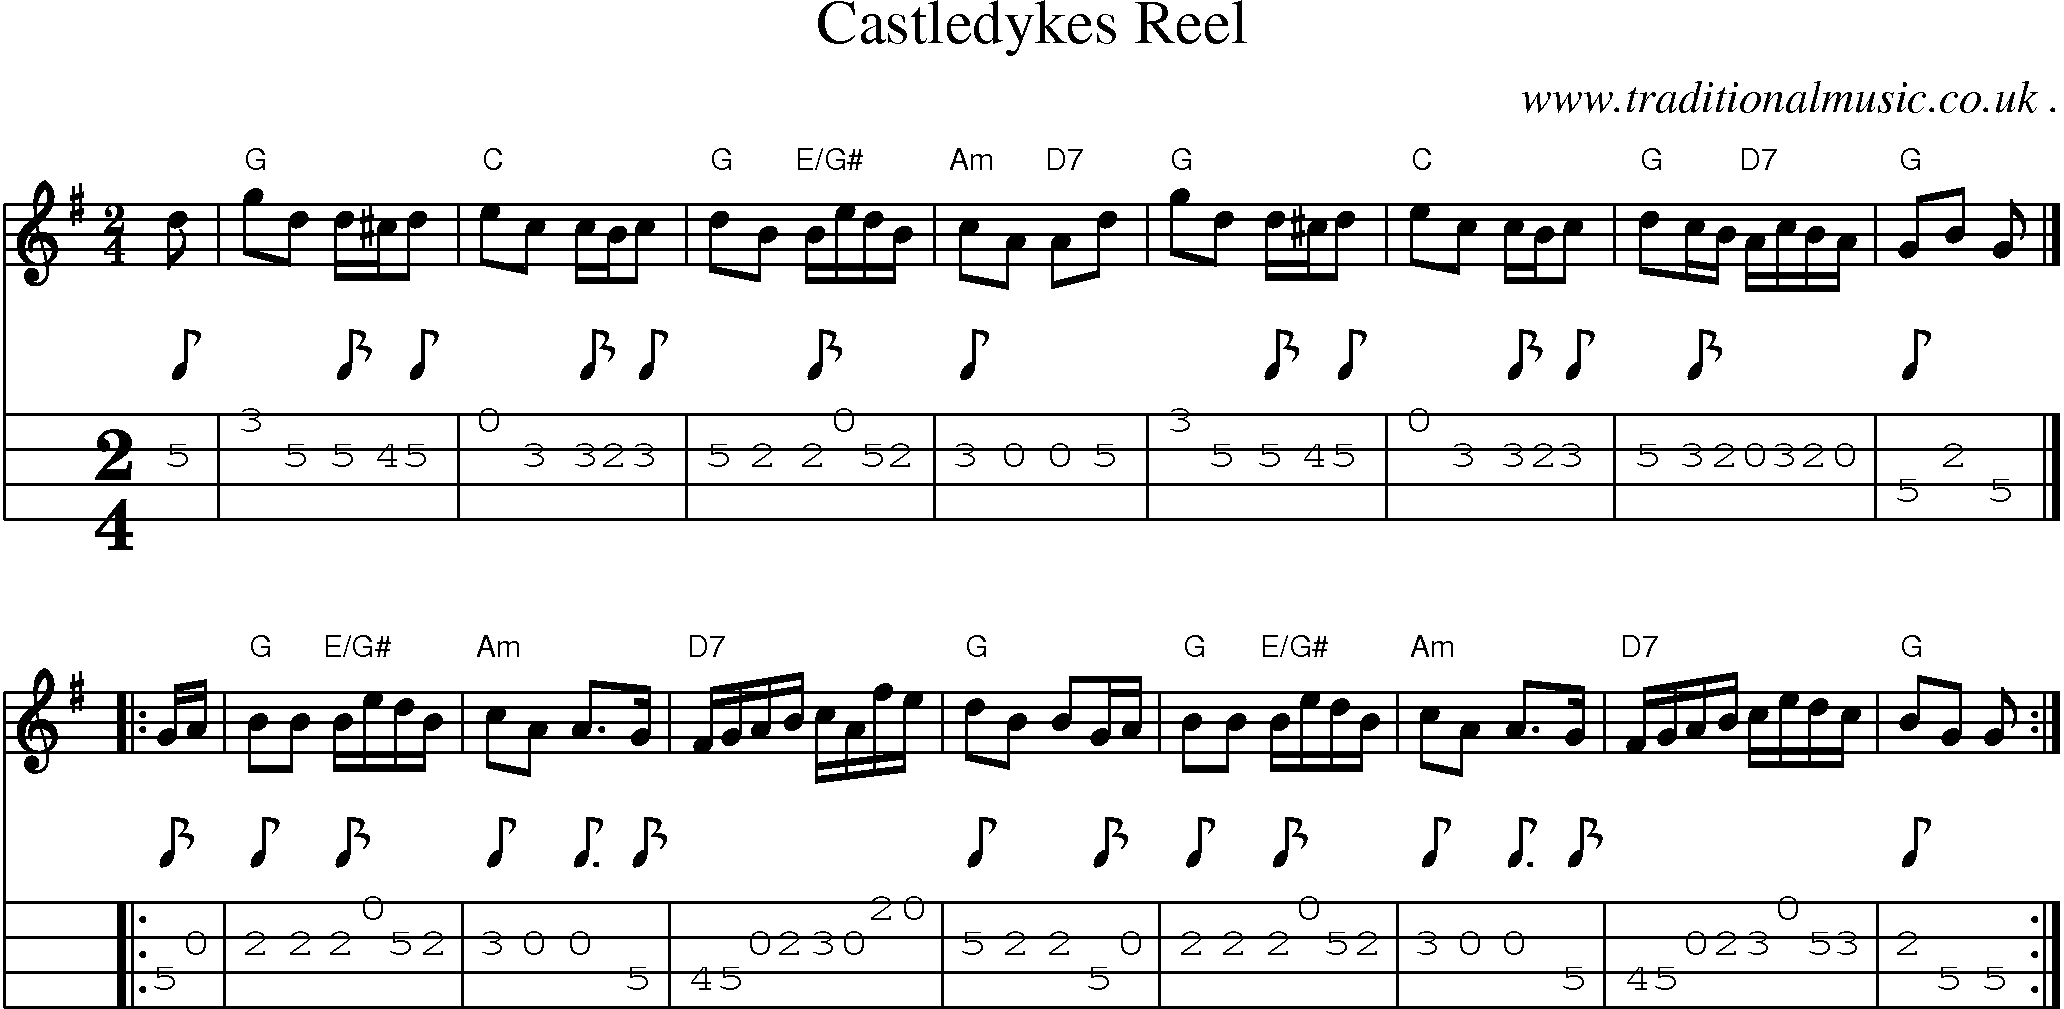 Sheet-music  score, Chords and Mandolin Tabs for Castledykes Reel